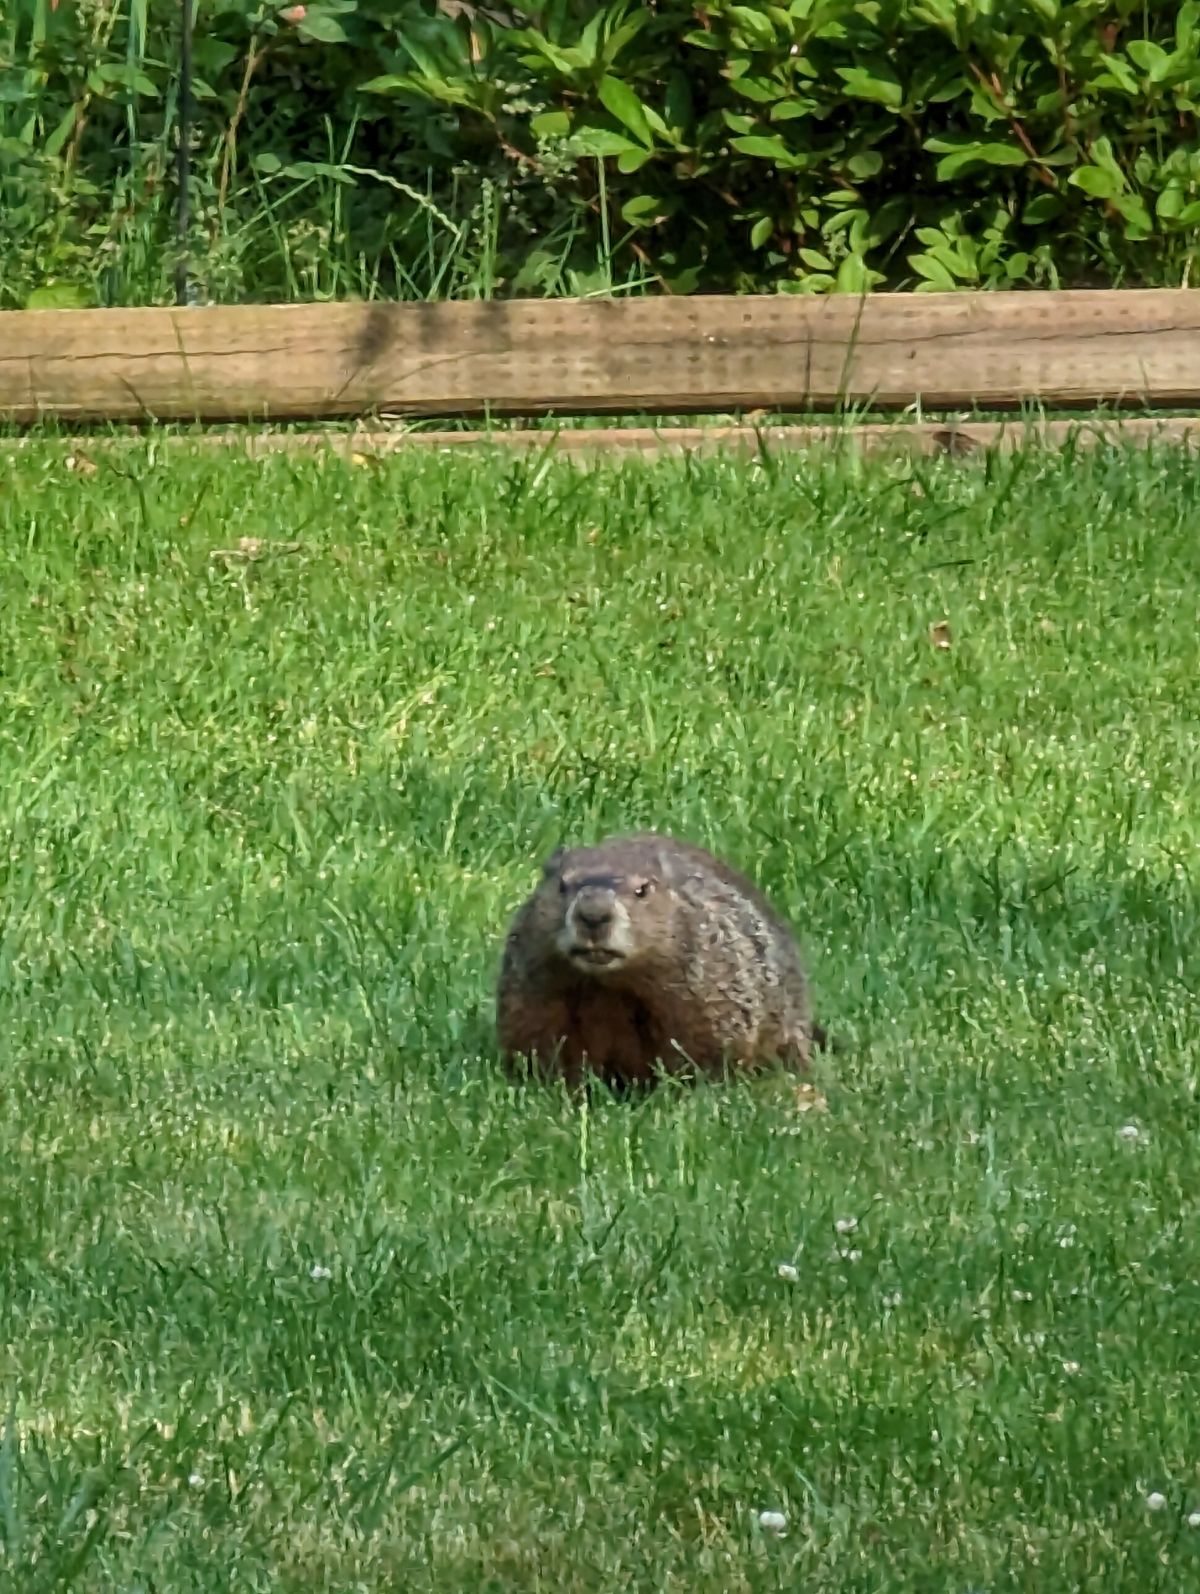 Angry beaver, uhm, I mean groundhogs